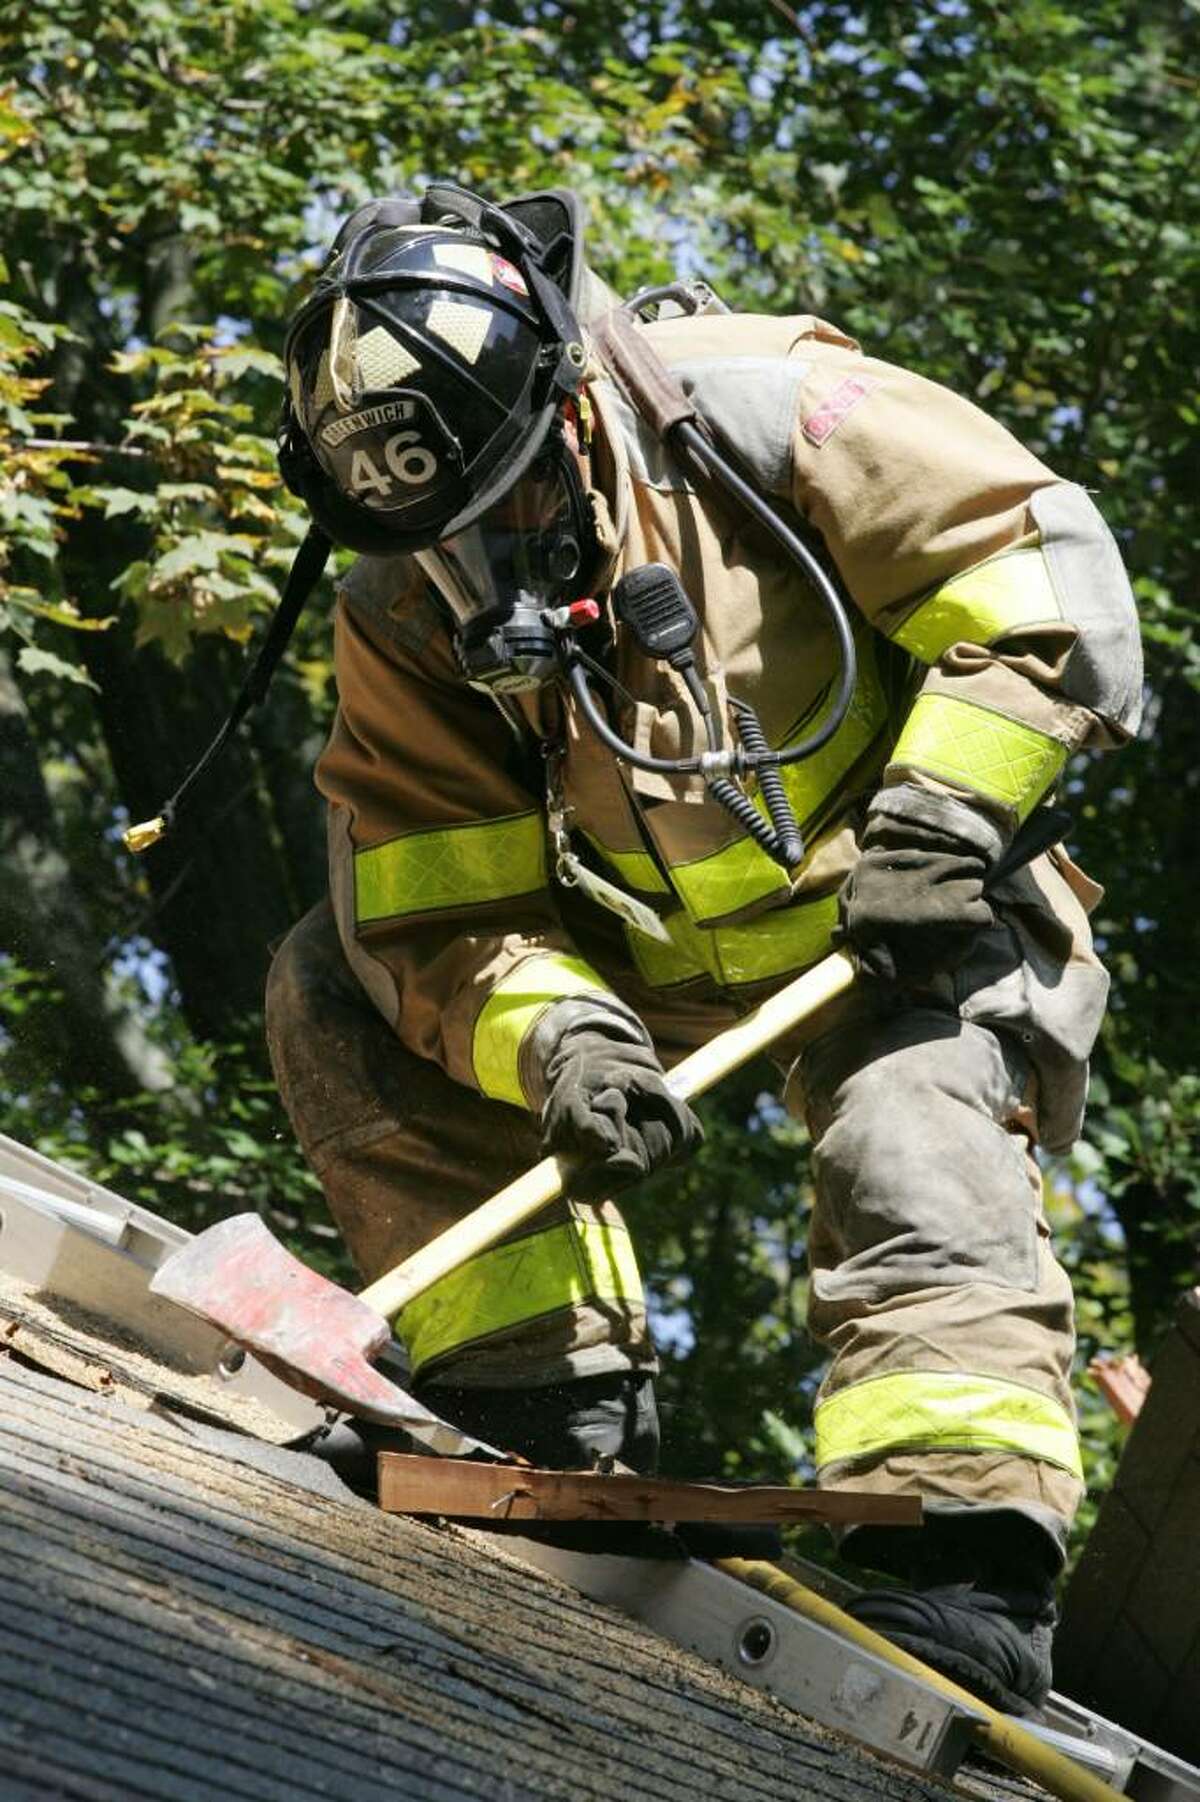 Greenwich firefighter Tony Schell uses his axe to chop through a roof during a training excercise Friday morning.